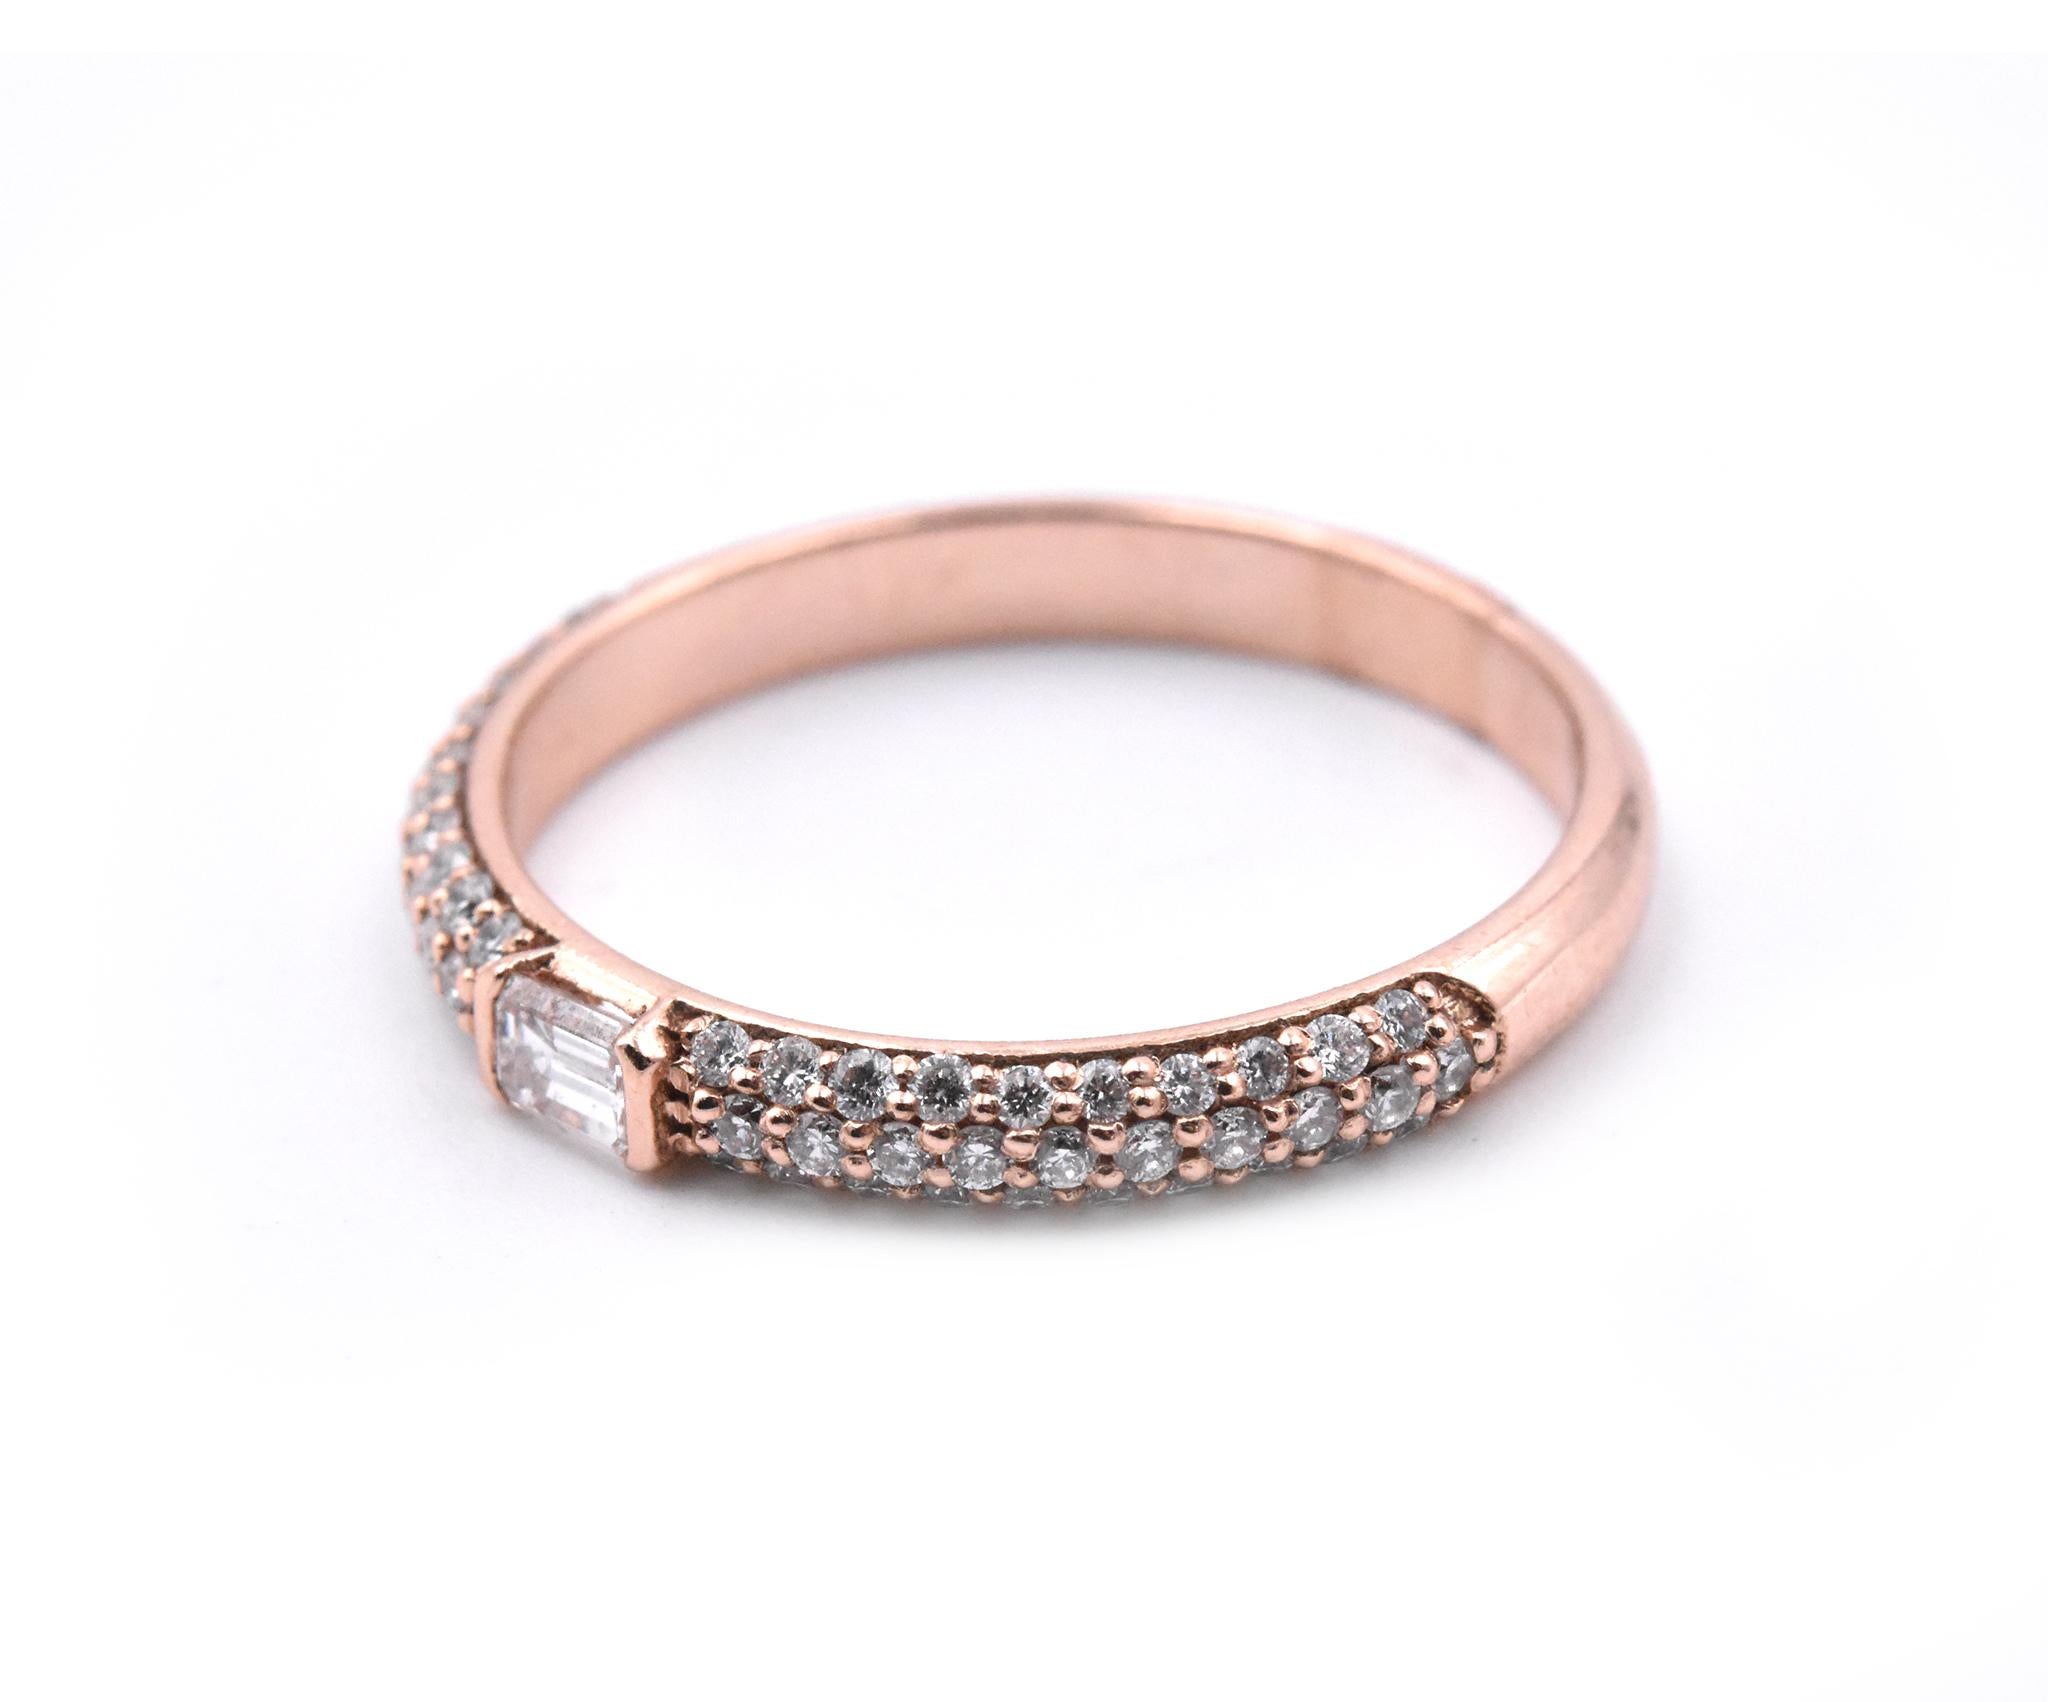 14 Karat Rose Gold Diamond Wedding Band In Excellent Condition For Sale In Scottsdale, AZ